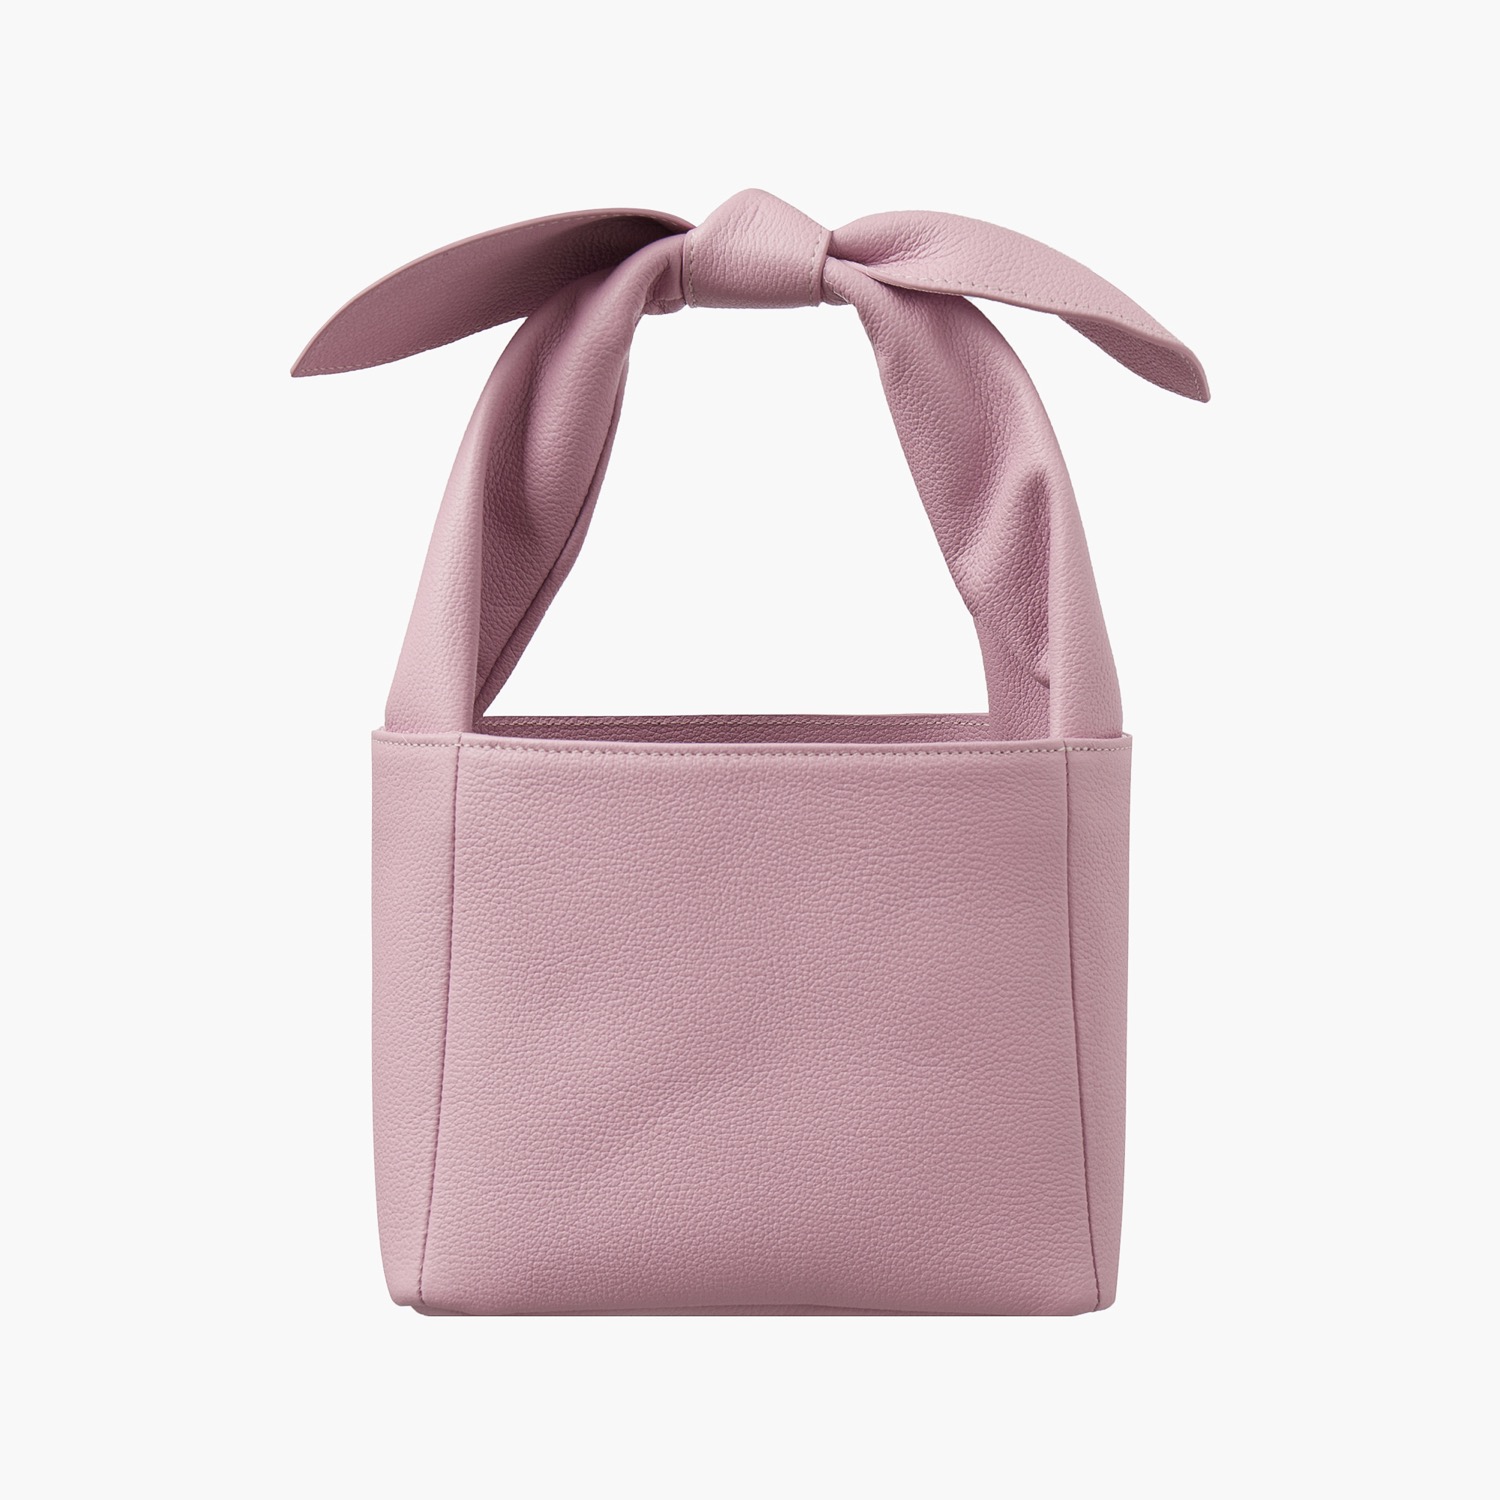 KNOTTED HANDLE LEATHER BAG, PINK